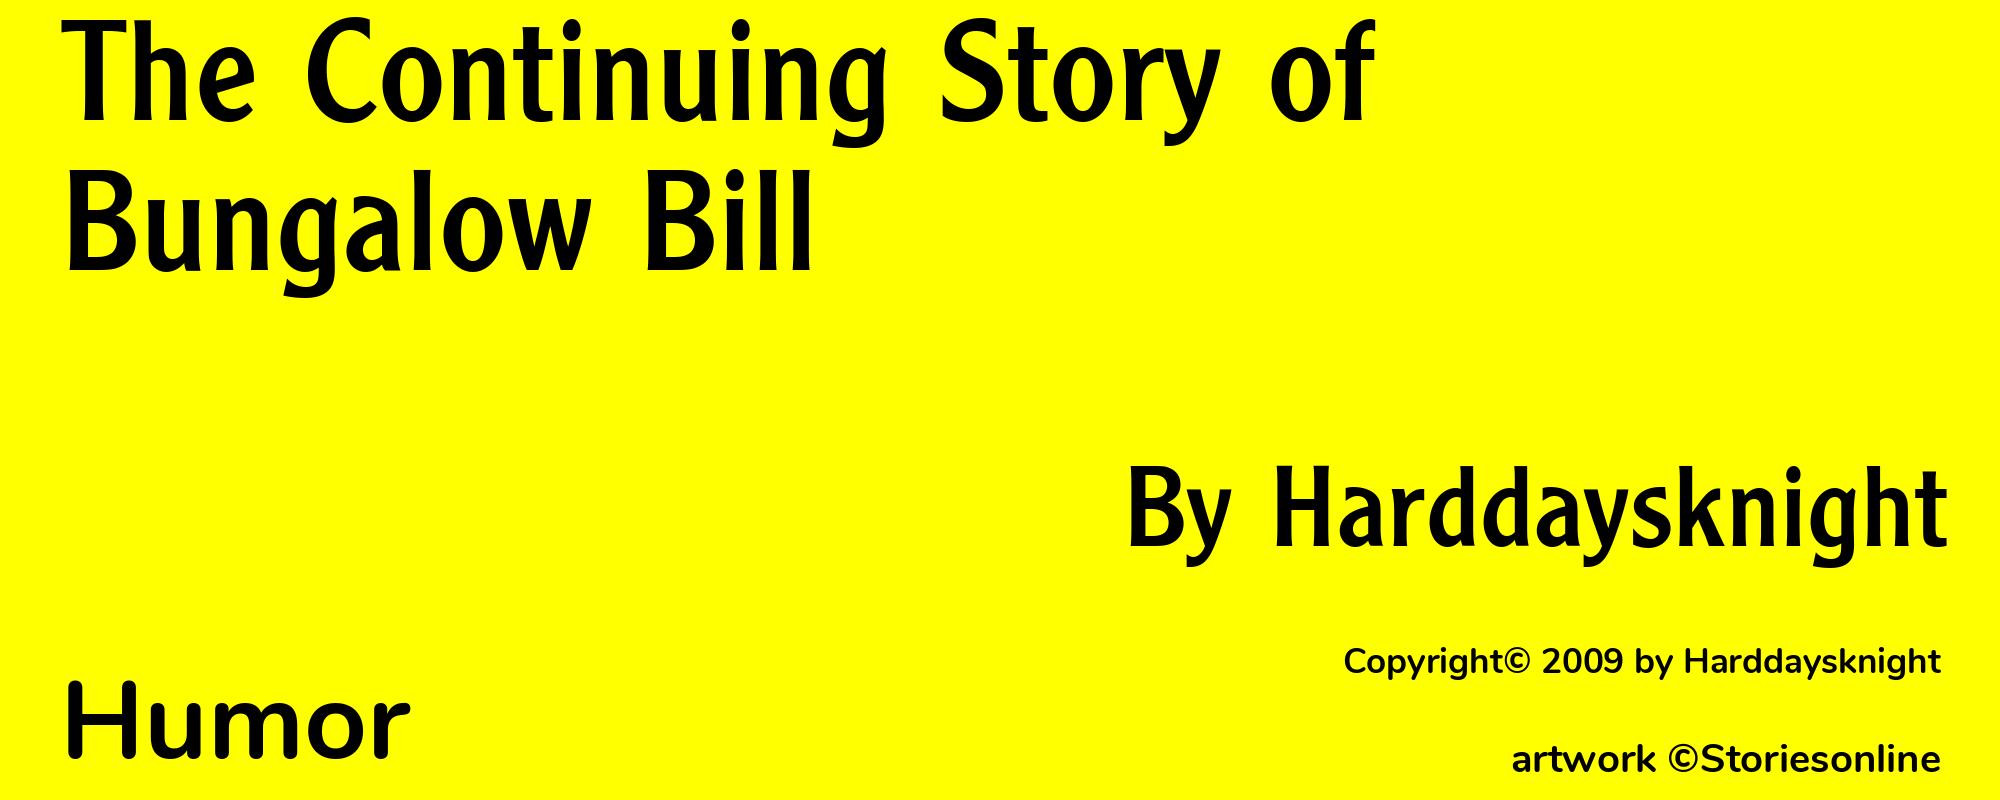 The Continuing Story of Bungalow Bill - Cover